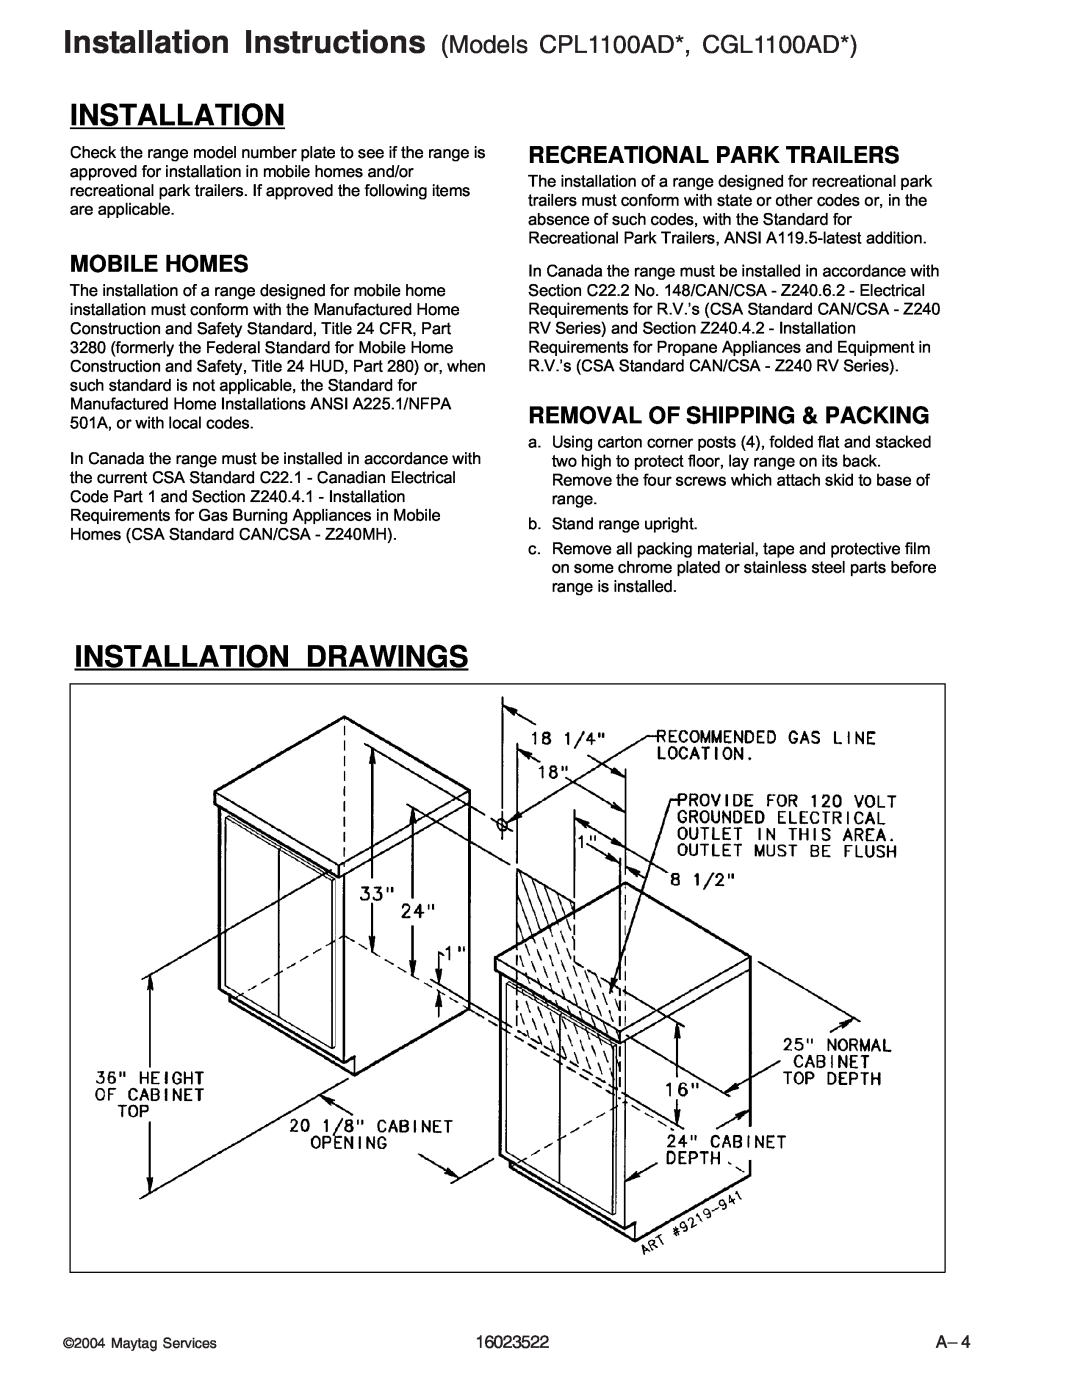 Maytag AGR4400ADW manual Installation Drawings, Installation Instructions Models CPL1100AD*, CGL1100AD, Mobile Homes 